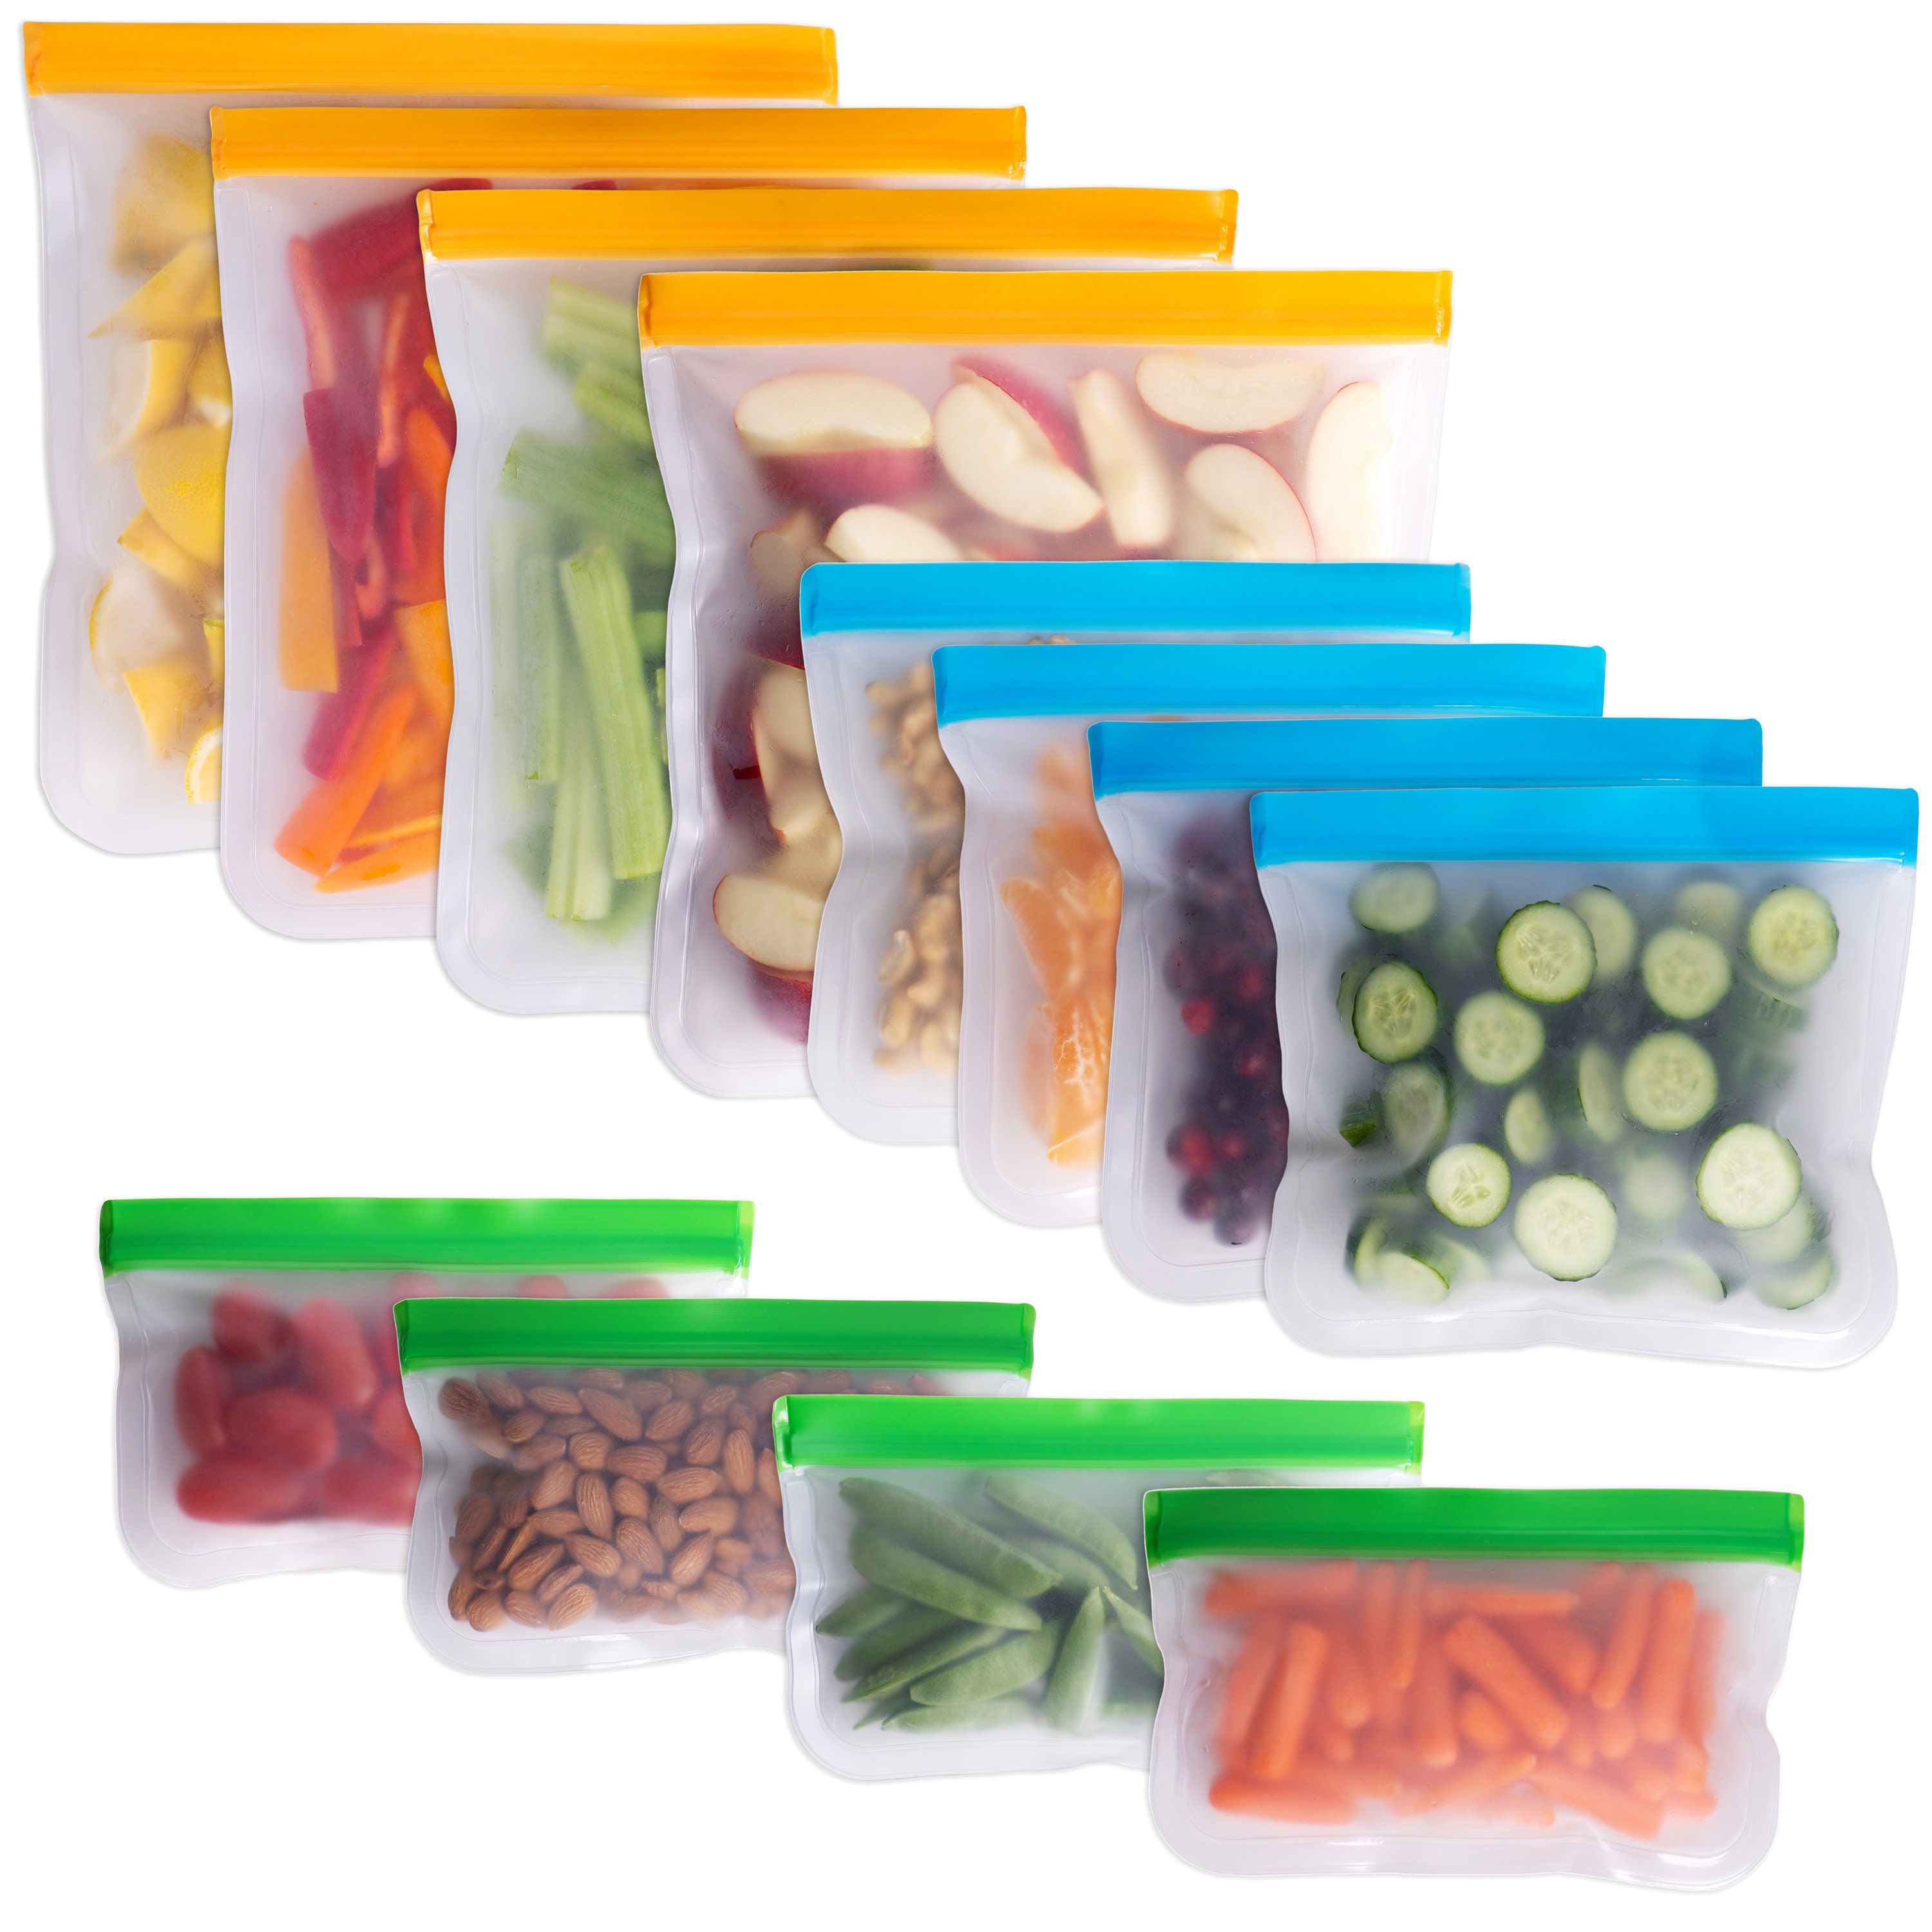 Greenzla Reusable Gallon Bags 8 Pack Extra THICK Reusable Freezer Bags BPA  Free, Easy Seal & LEAKPROOF Food 